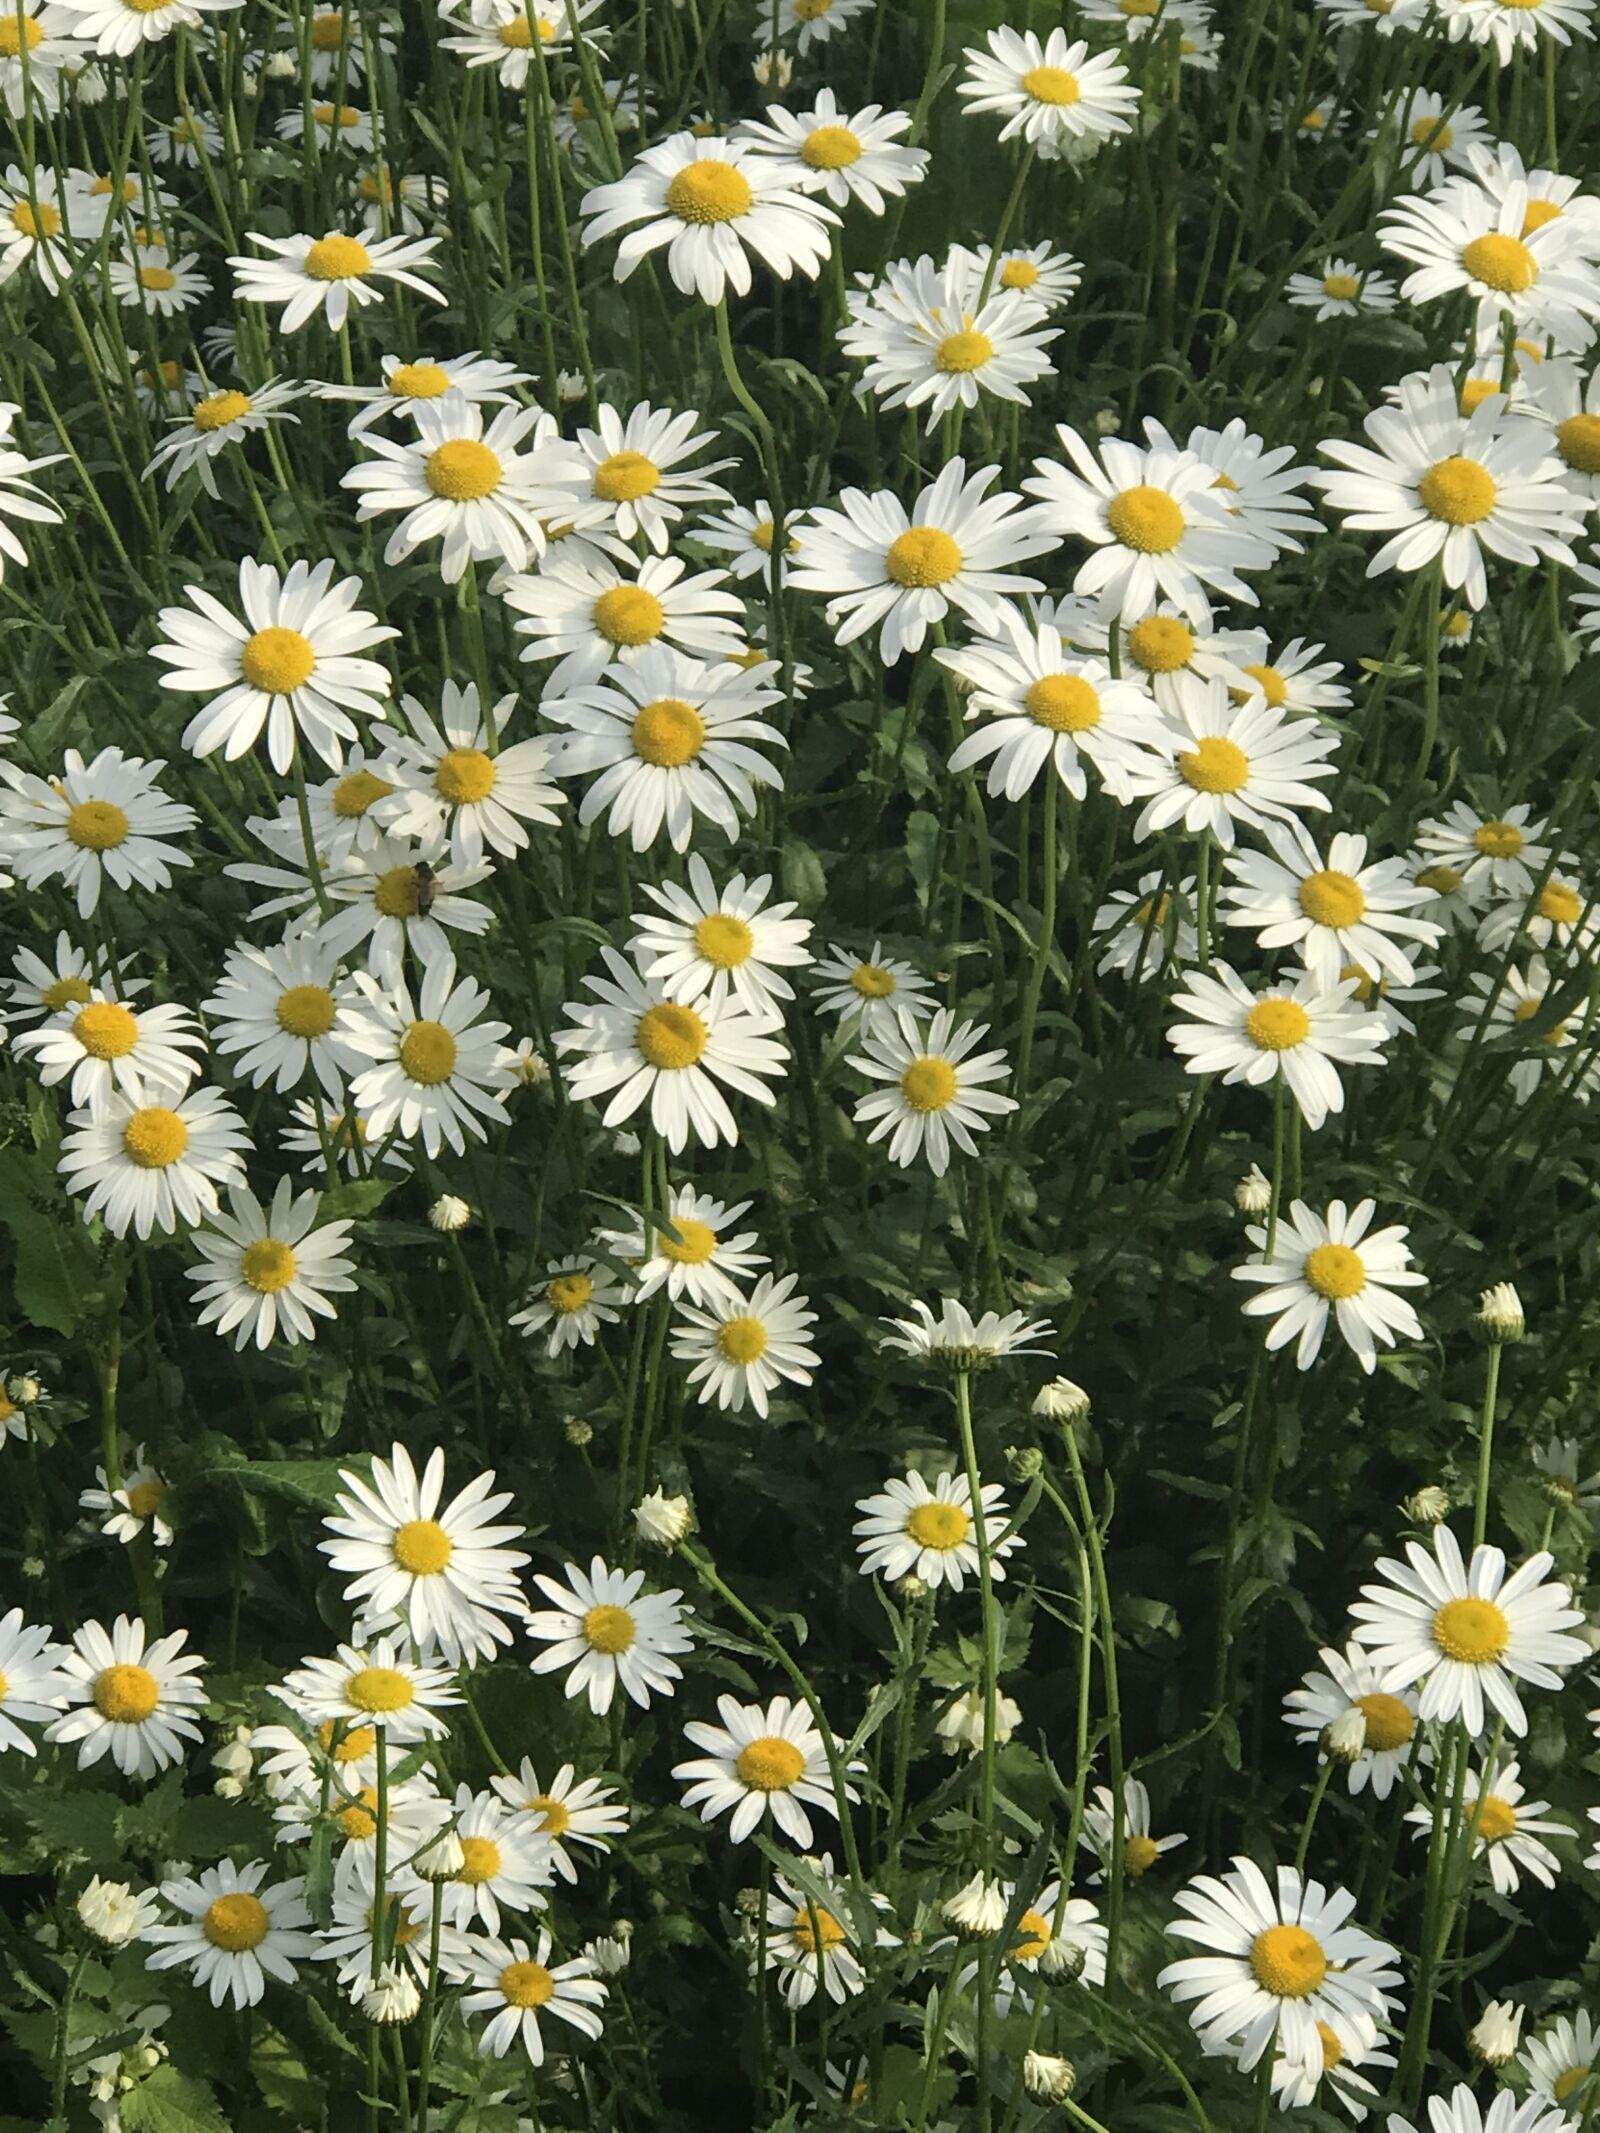 iPhone 7 Plus back dual camera 6.6mm f/2.8 sample photo. Daisy, spring, nature photography